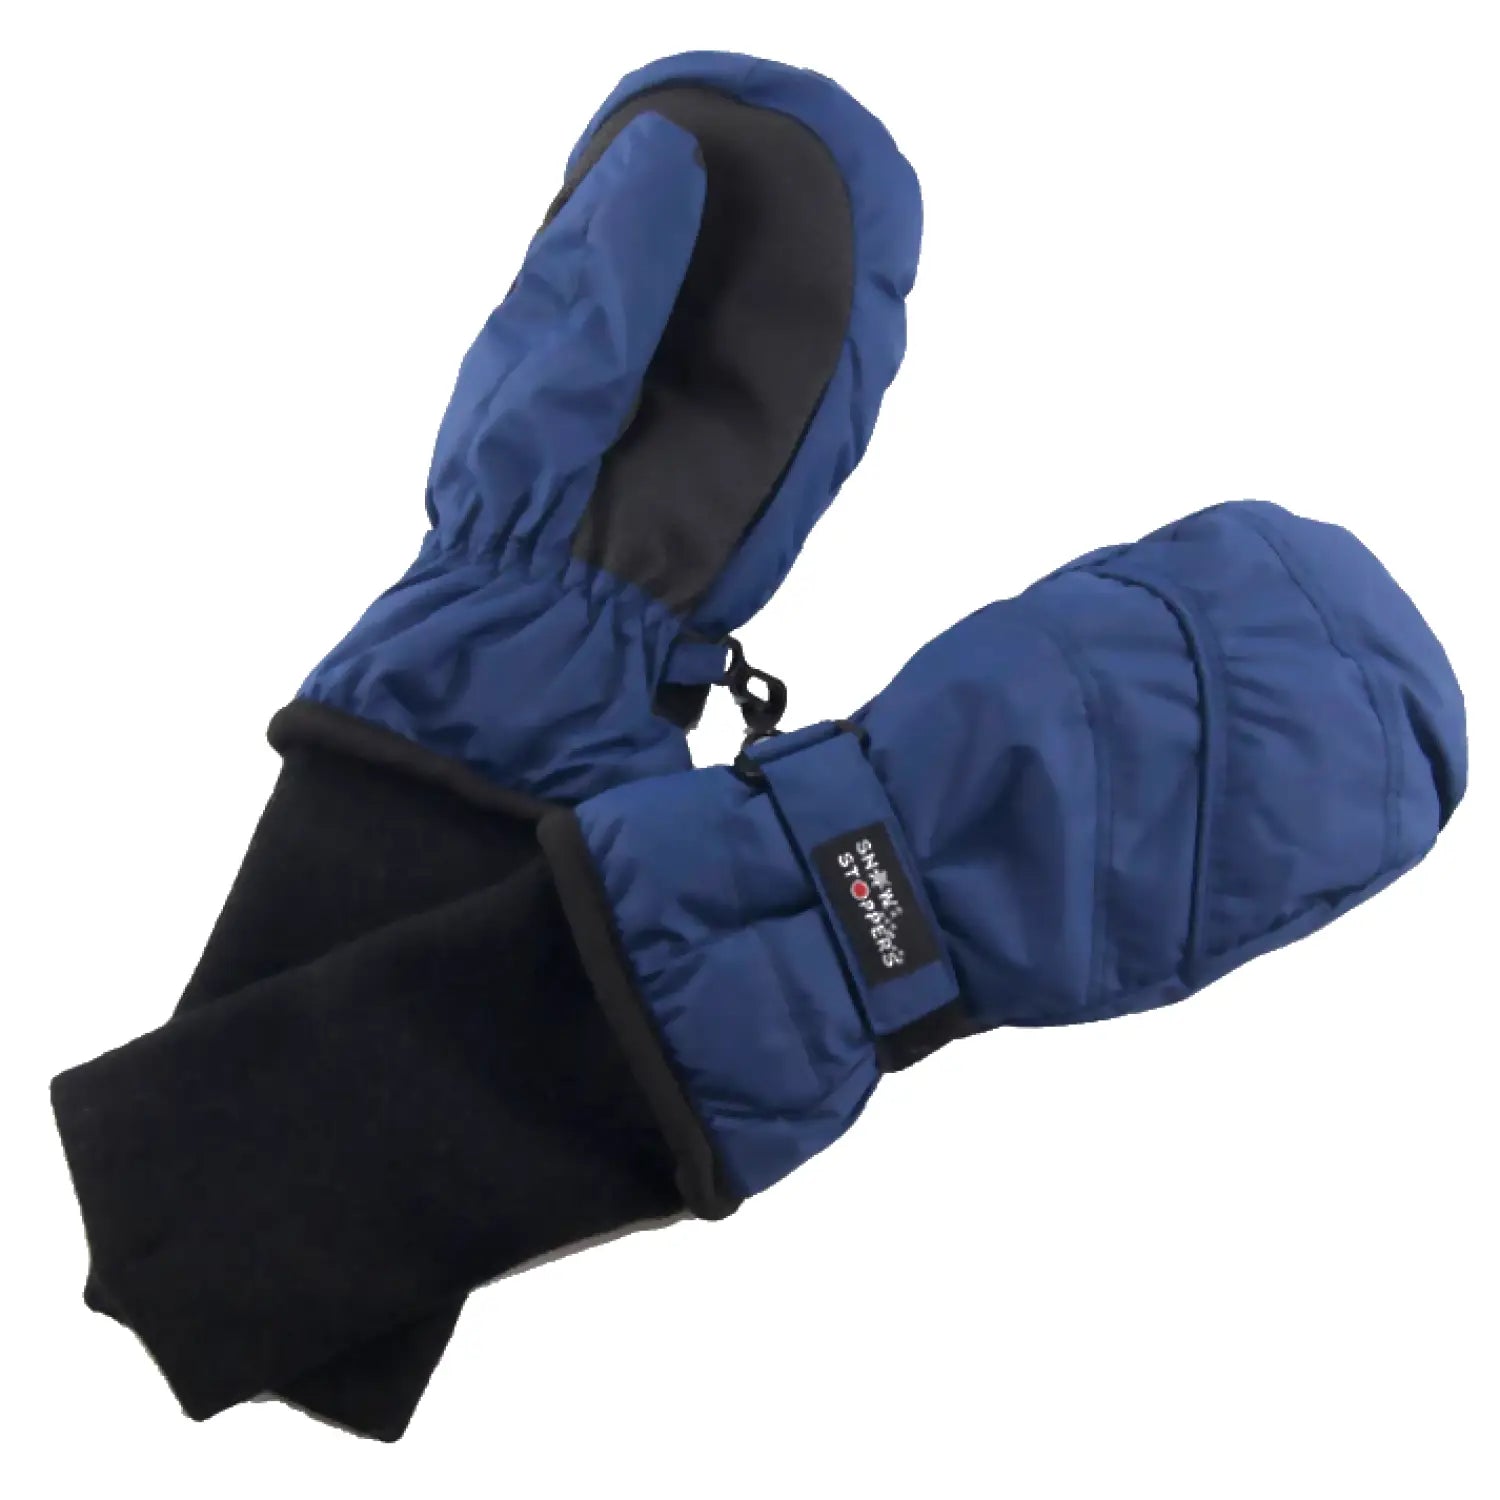 SnowStoppers® Original Extended Cuff Mittens Navy Blue